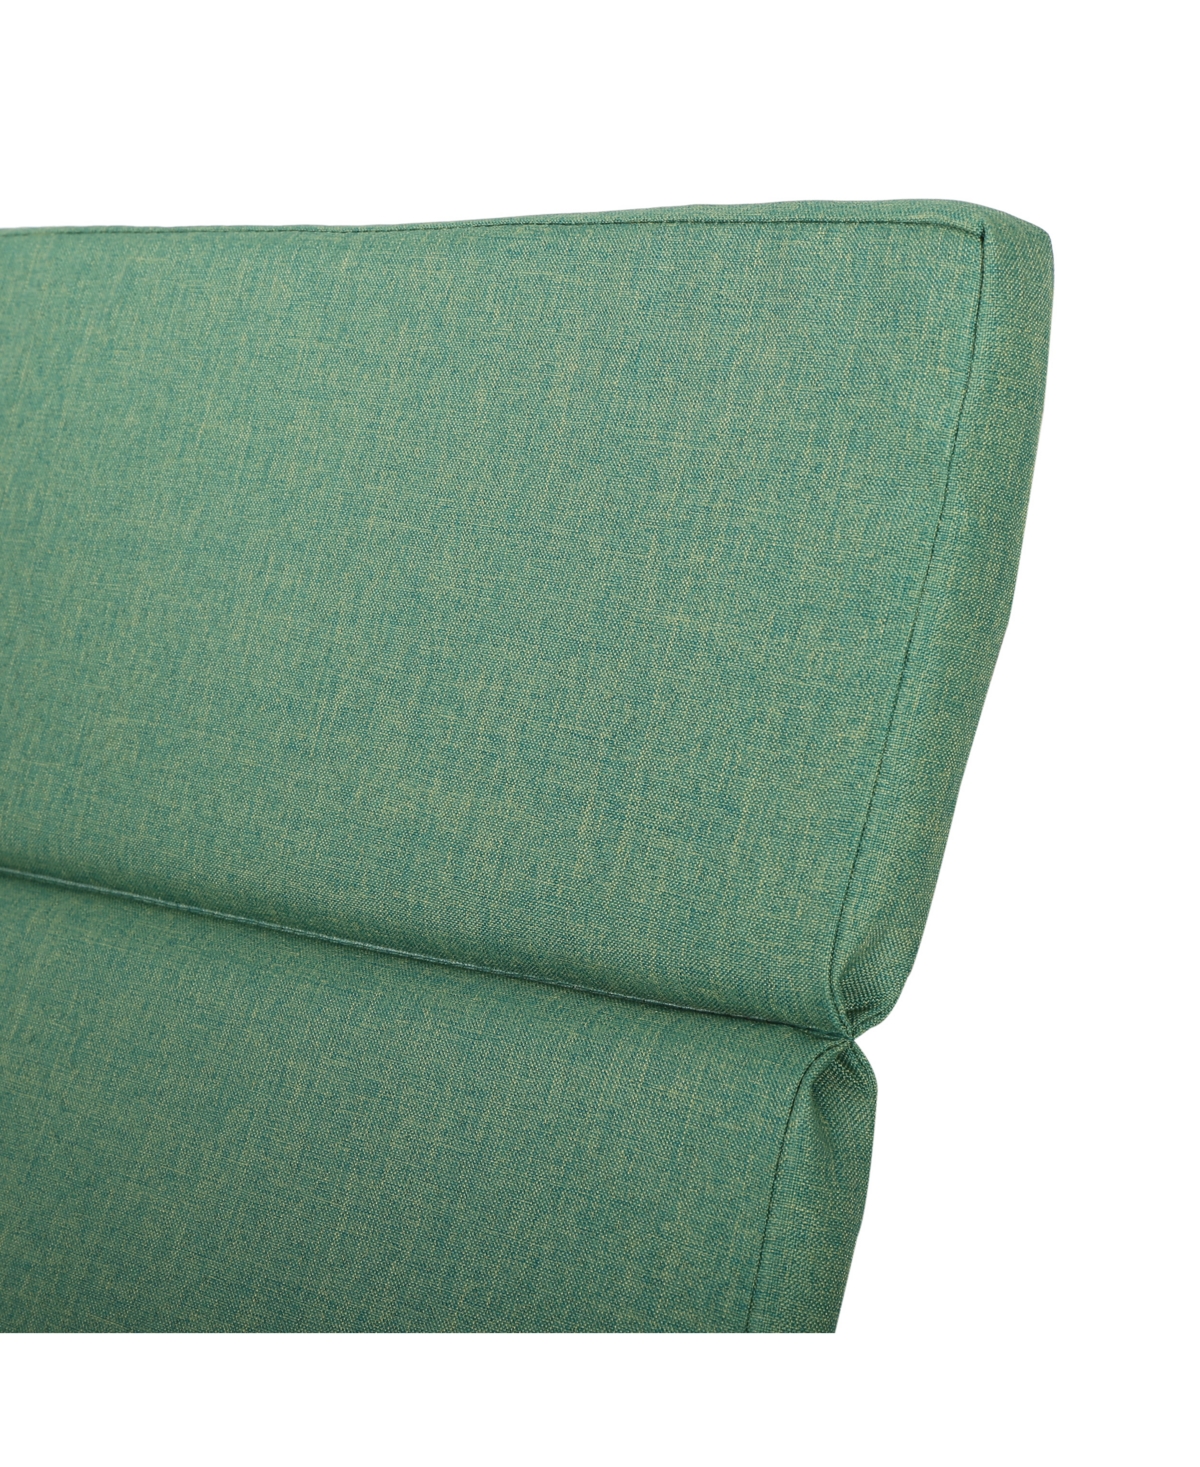 Shop Noble House Thome Outdoor Chaise Lounge Cushion In Green,white Stripe